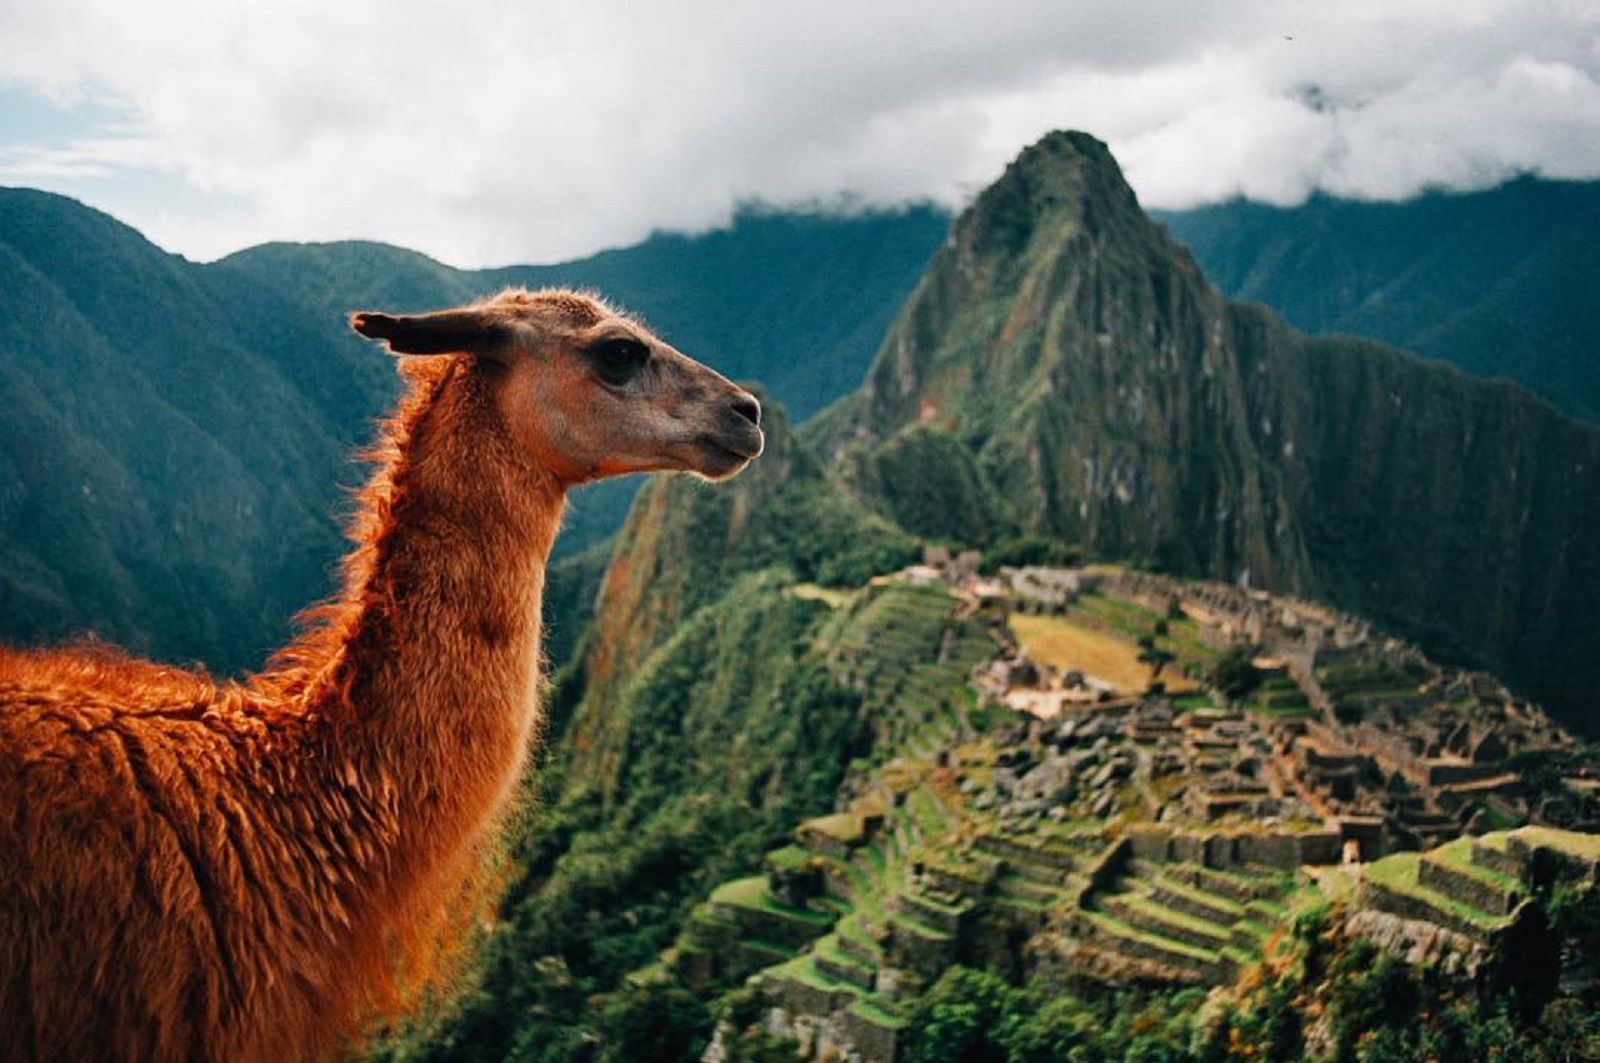 30 most instagrammed landmarks from around the world image 12